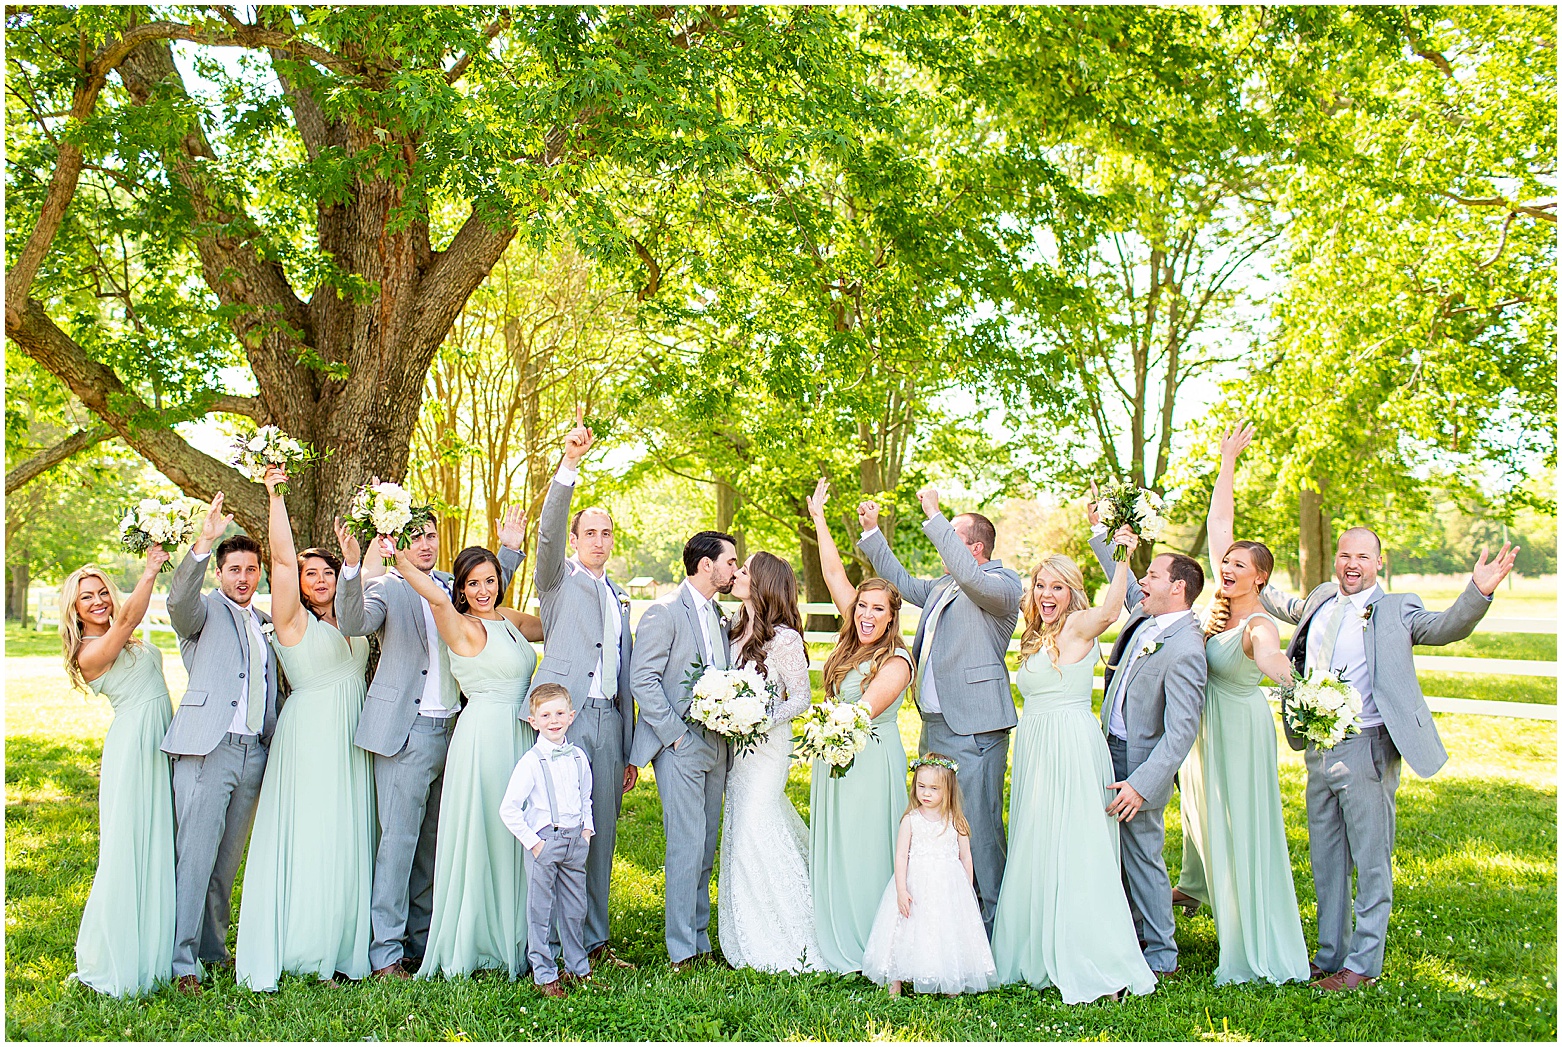 View More: http://hopetaylorphotographyphotos.pass.us/ashley-and-wythe